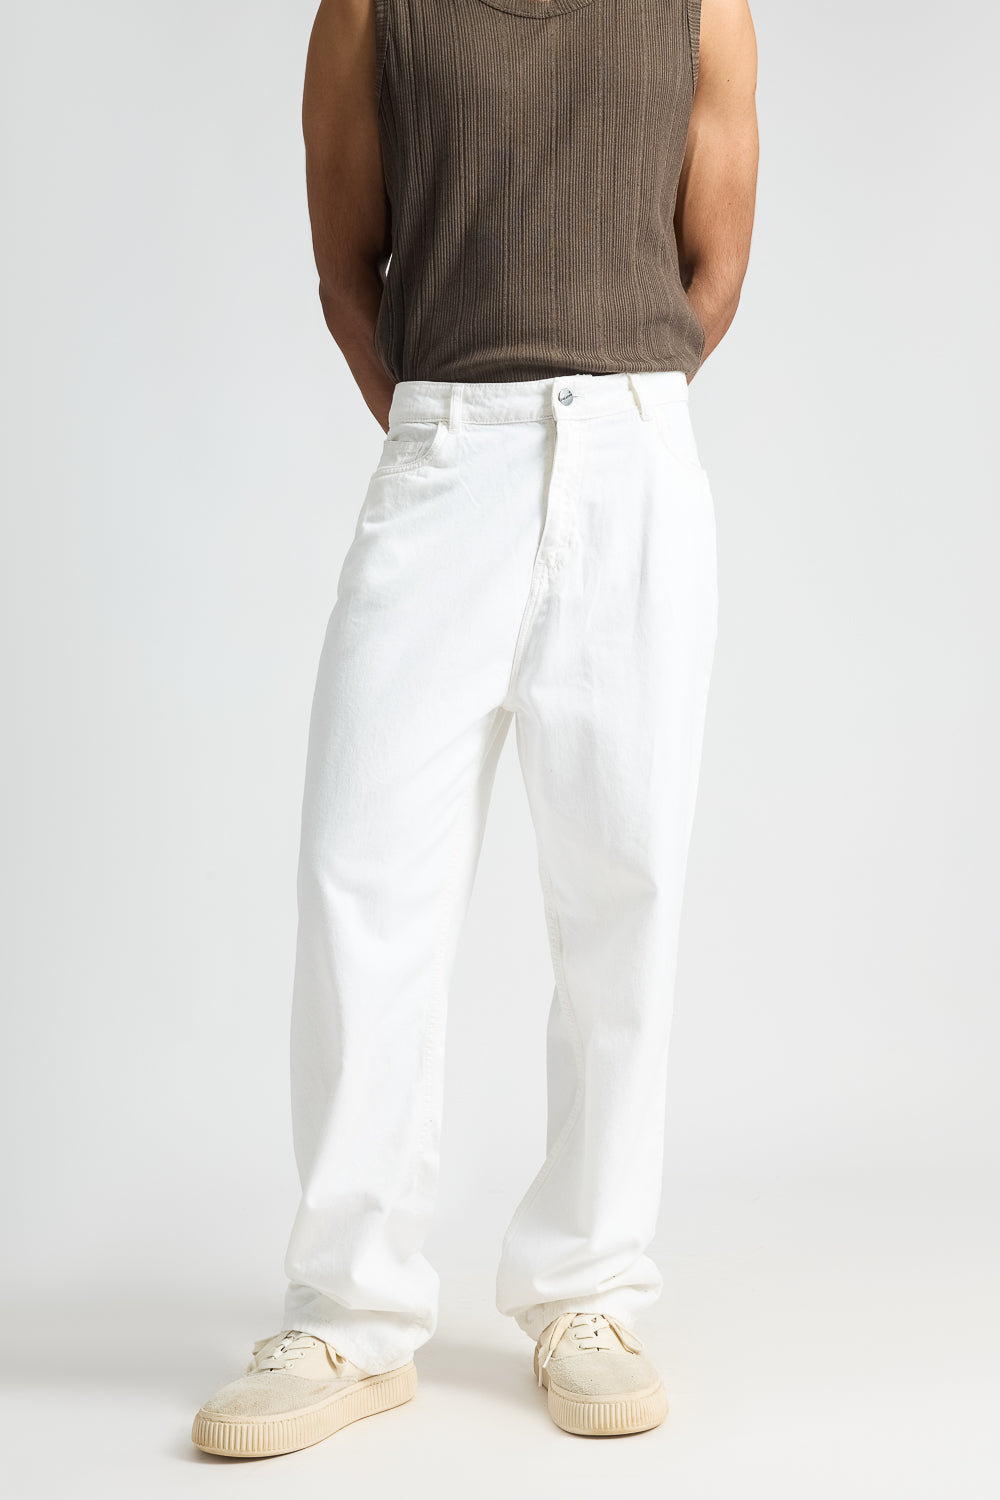 TIMELESS WHITE STRAIGHT FIT MENS JEANS